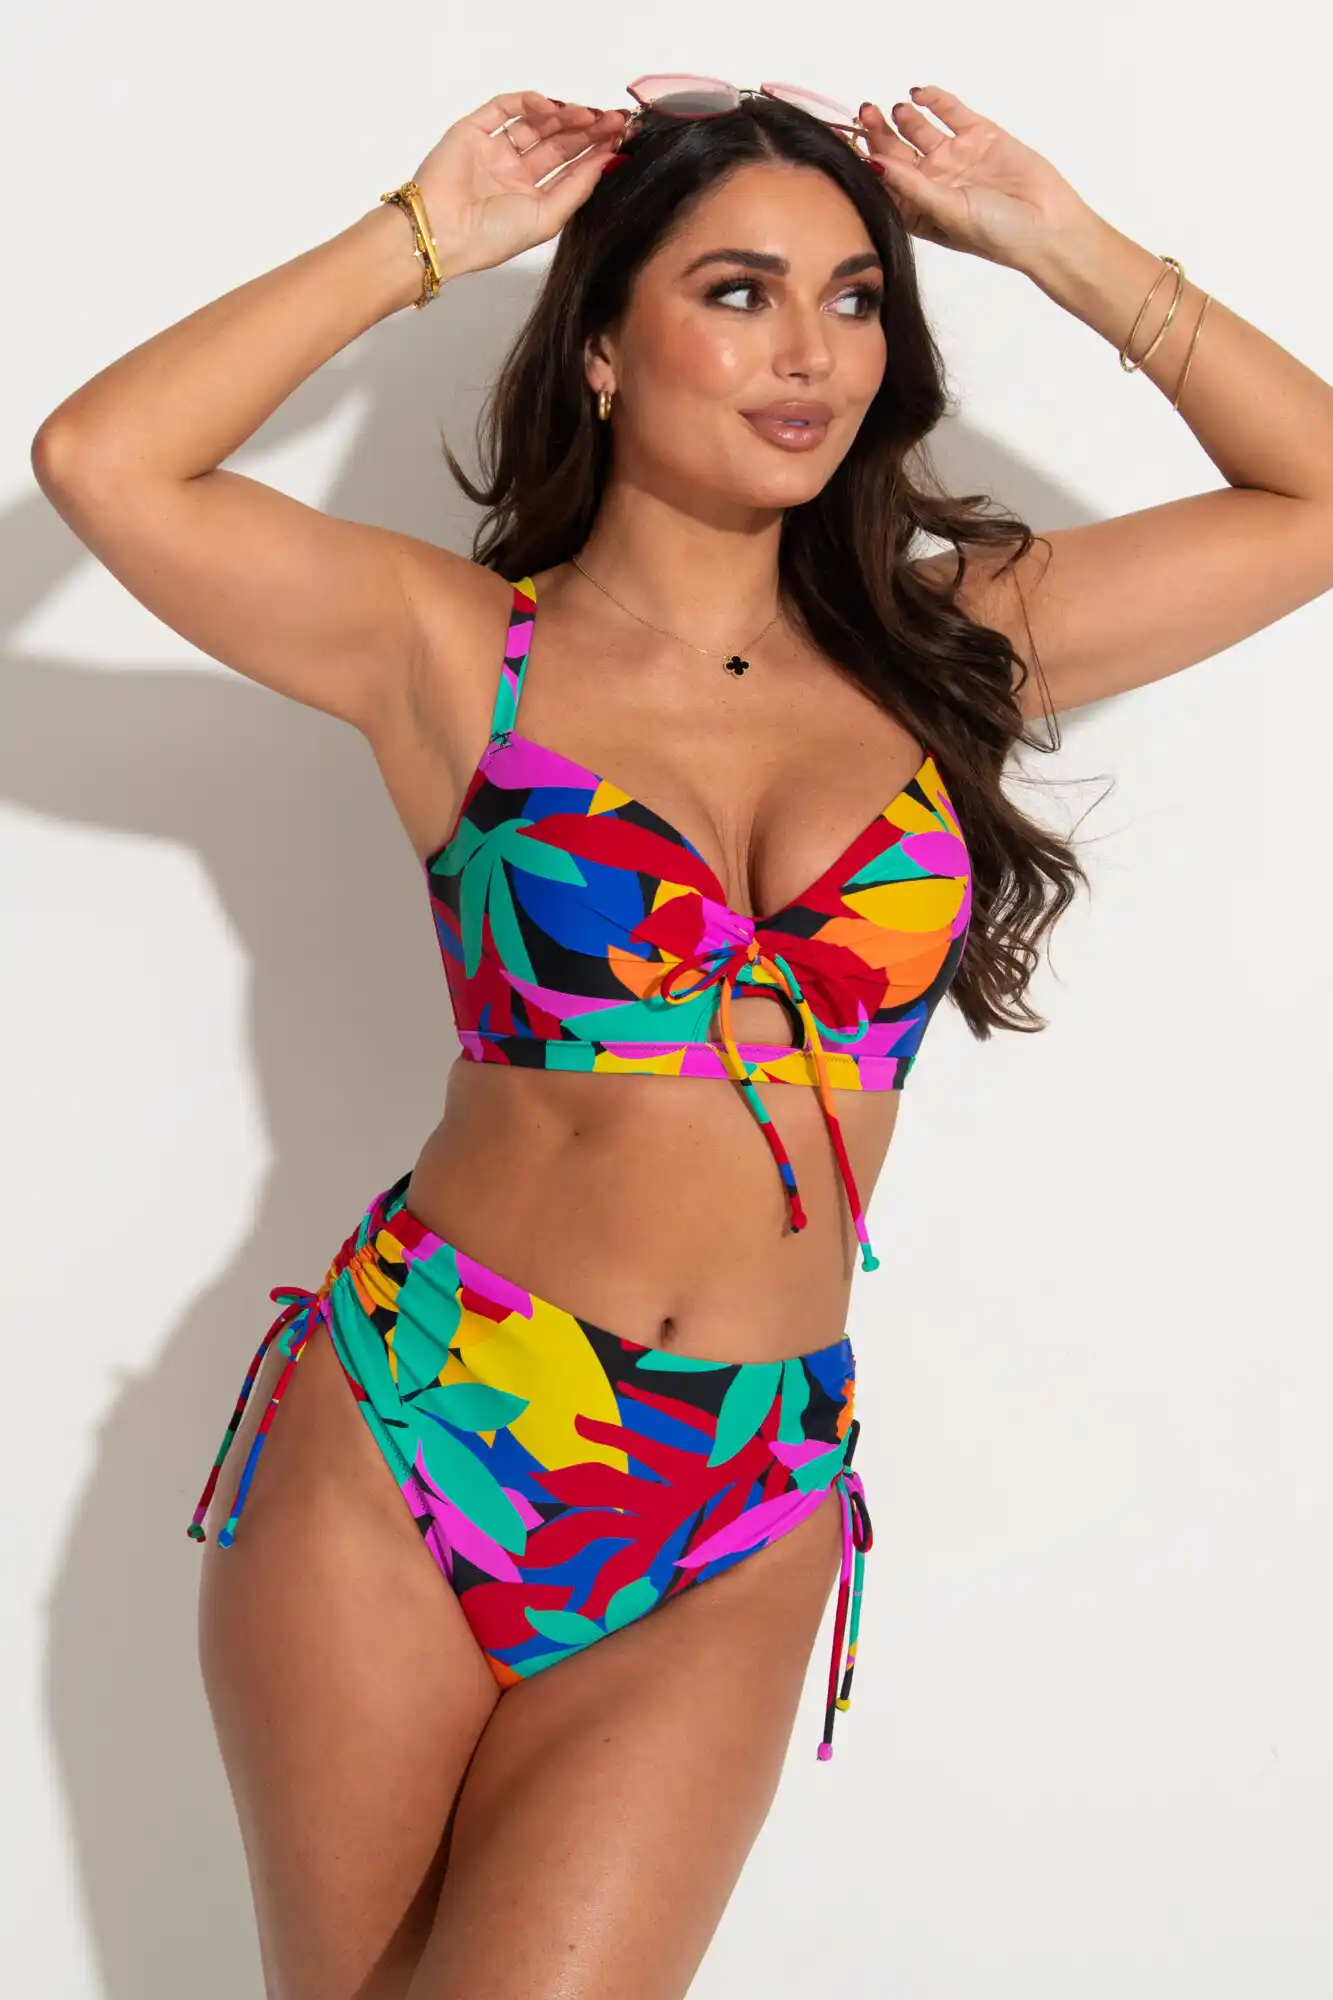 Cup size bikinis UK - 76 products